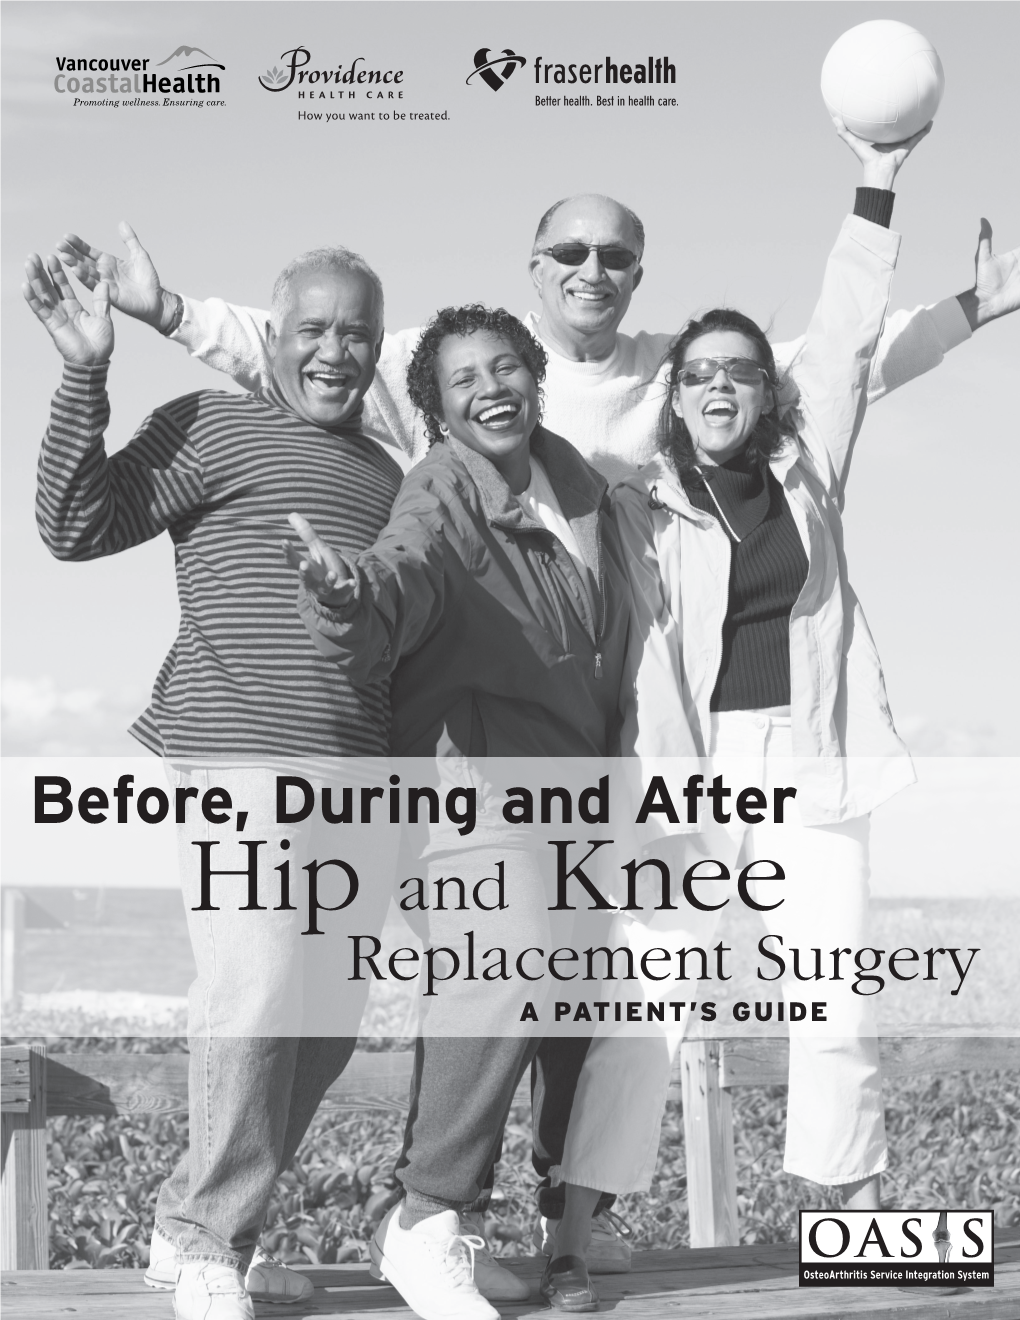 Before, During and After Hip and Knee Replacement Surgery a PATIENT’S GUIDE